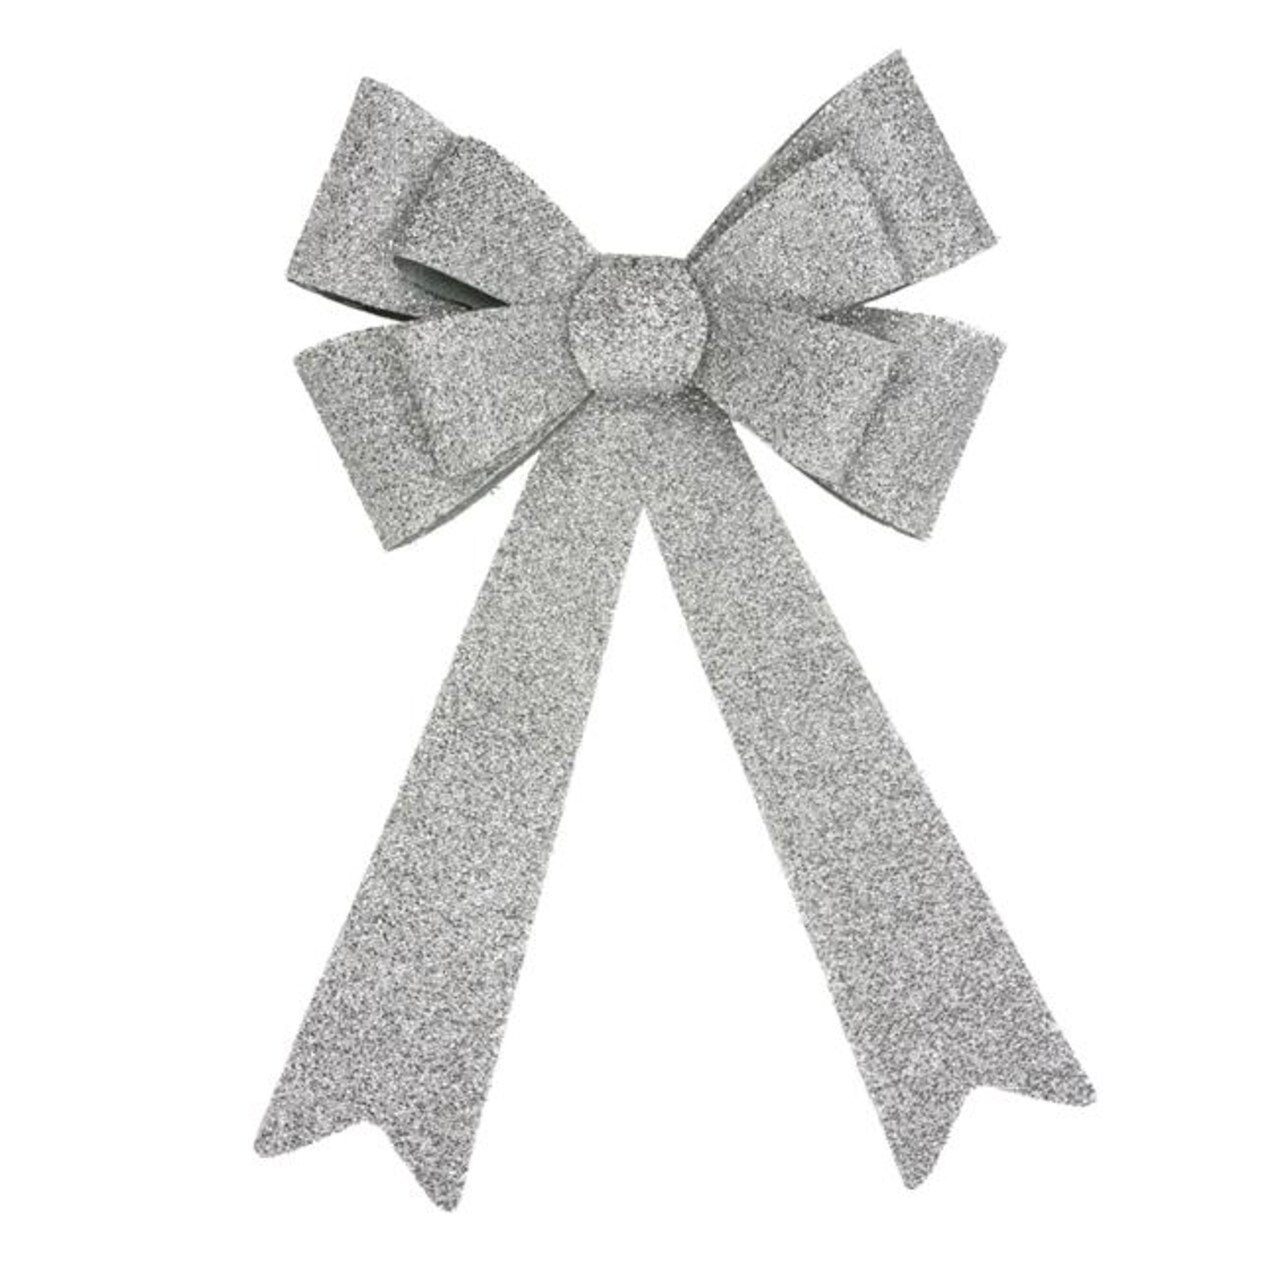 Northlight 34902104 24 x 16 x 2.5 in. LED Lighted Tinsel Bow Christmas Decoration, Silver